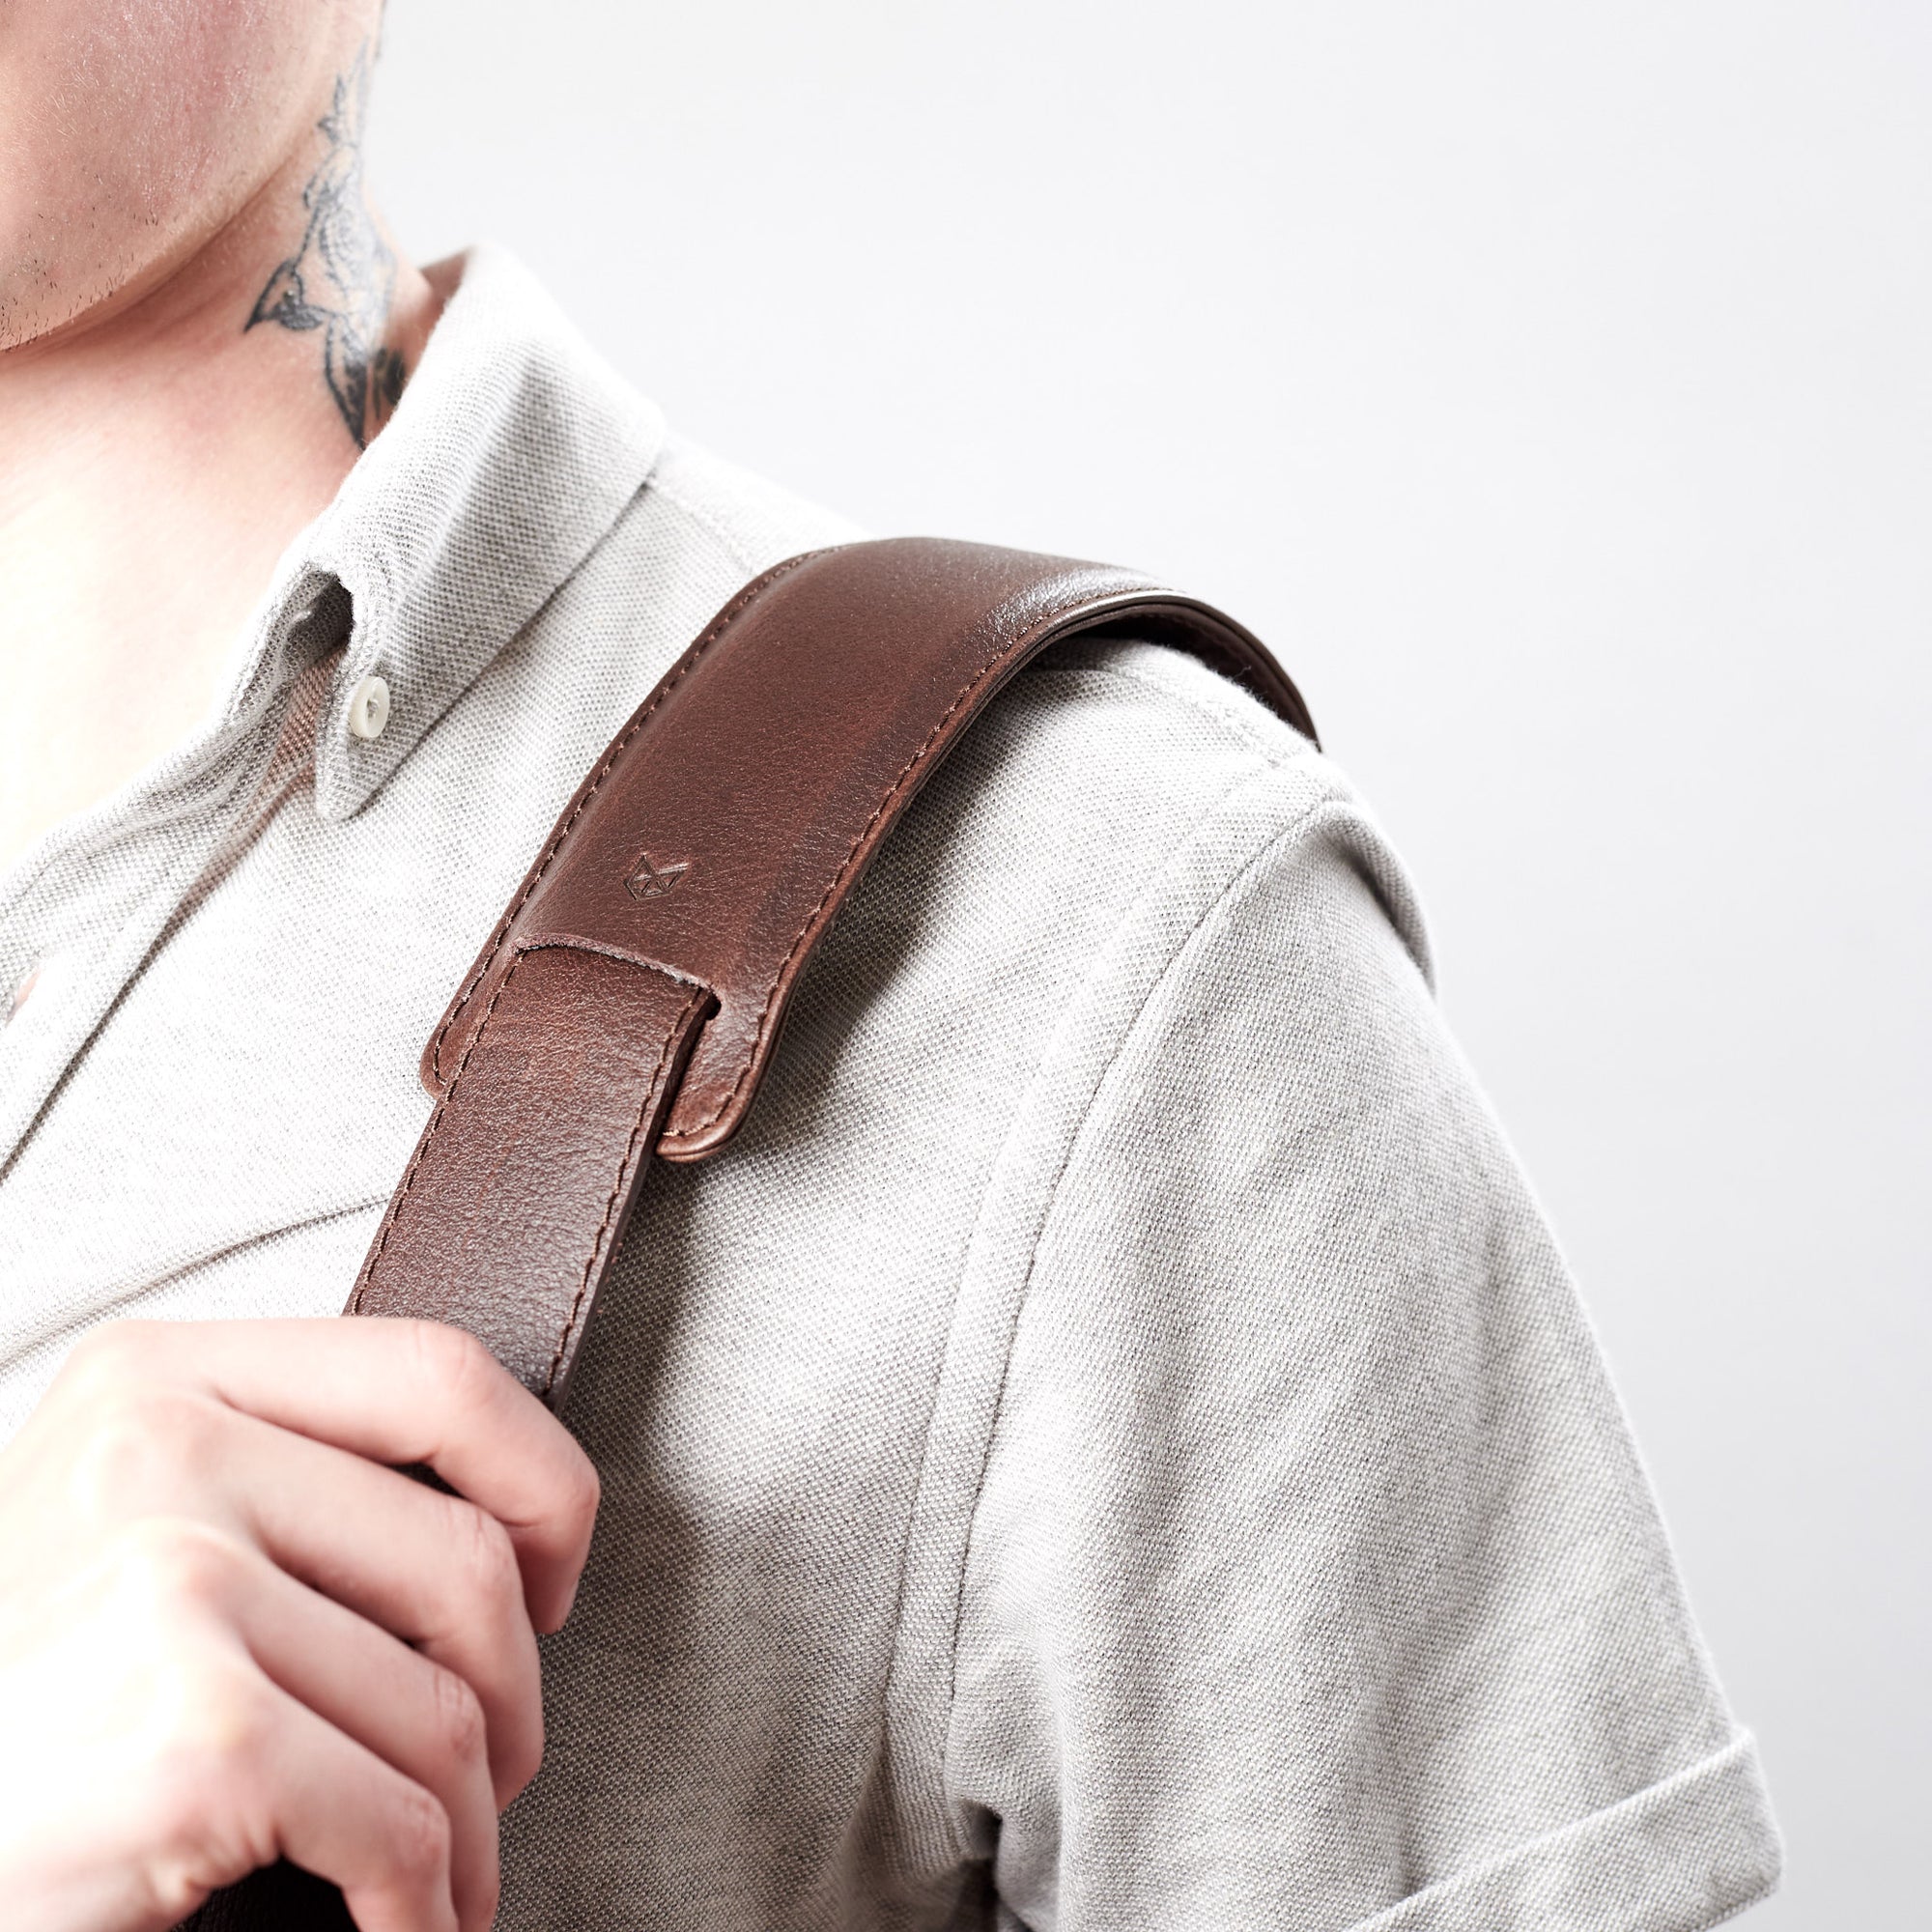 Style. Shoulder strap detail close up. Roko briefcase by Capra Leather.